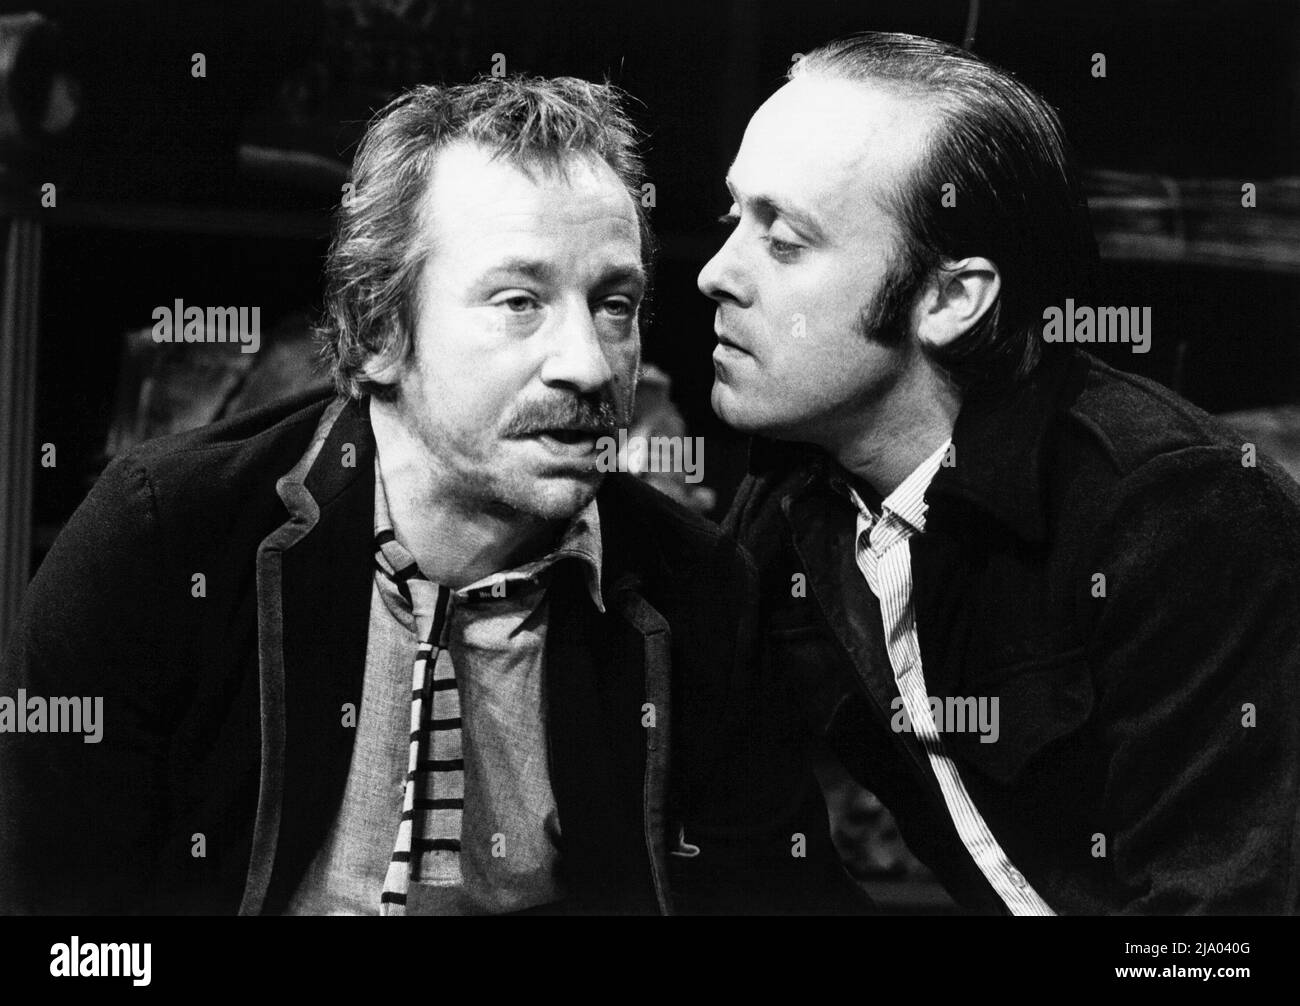 l-r : Bill Paterson (F S McDade), Alex Norton (Reader) in WRITER’S CRAMP by John Byrne at the Hampstead Theatre, London NW3  12/08/1980  set design: John Byrne  costumes: Jessica Gwynn  lighting: Alan O’Toole  director: Robin Lefevre Stock Photo